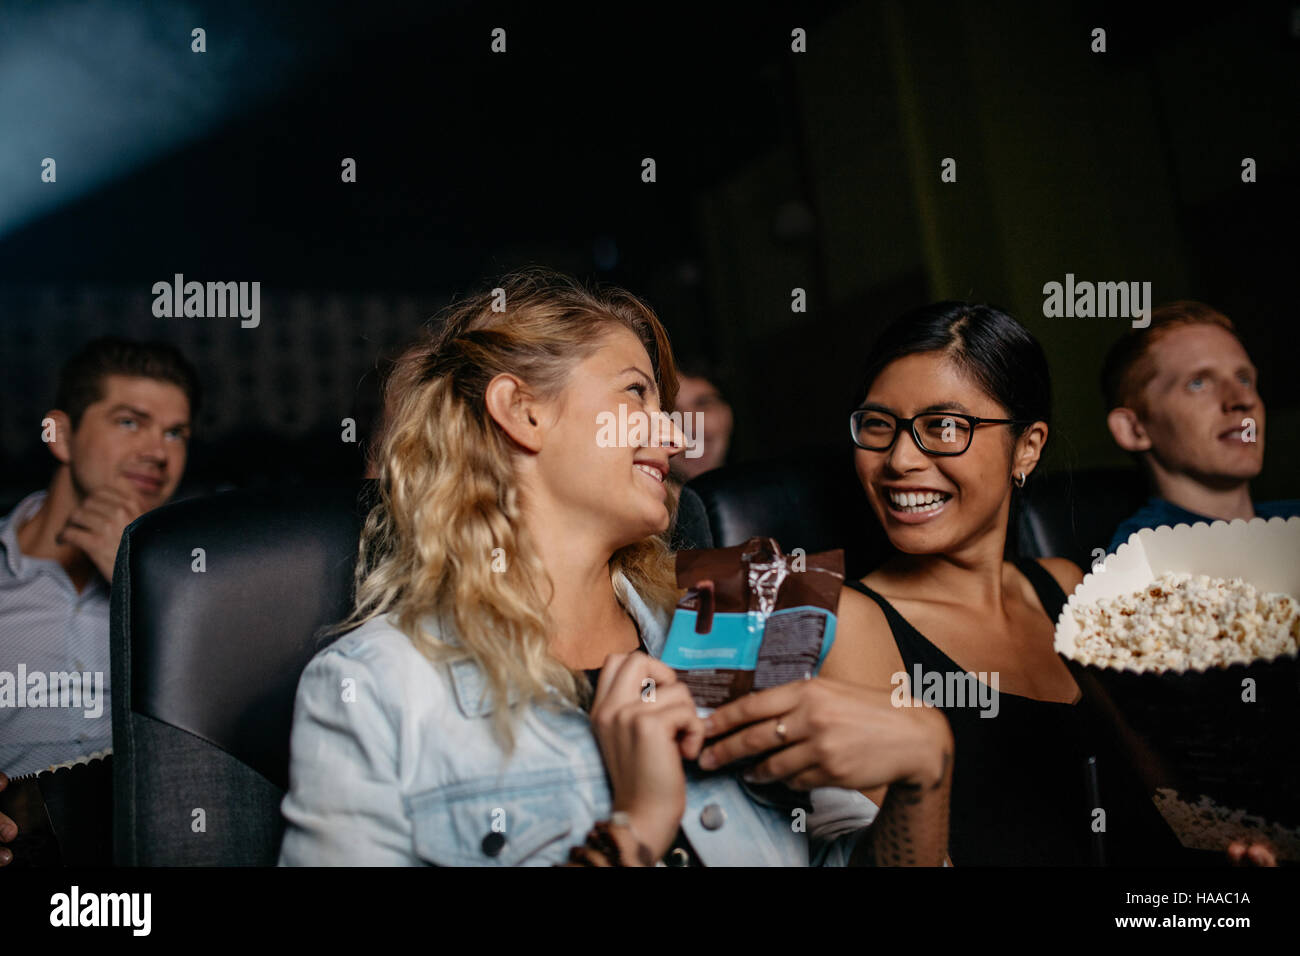 Two young woman chatting and smiling while sitting in movie theater. Group of people watching movie together. Stock Photo